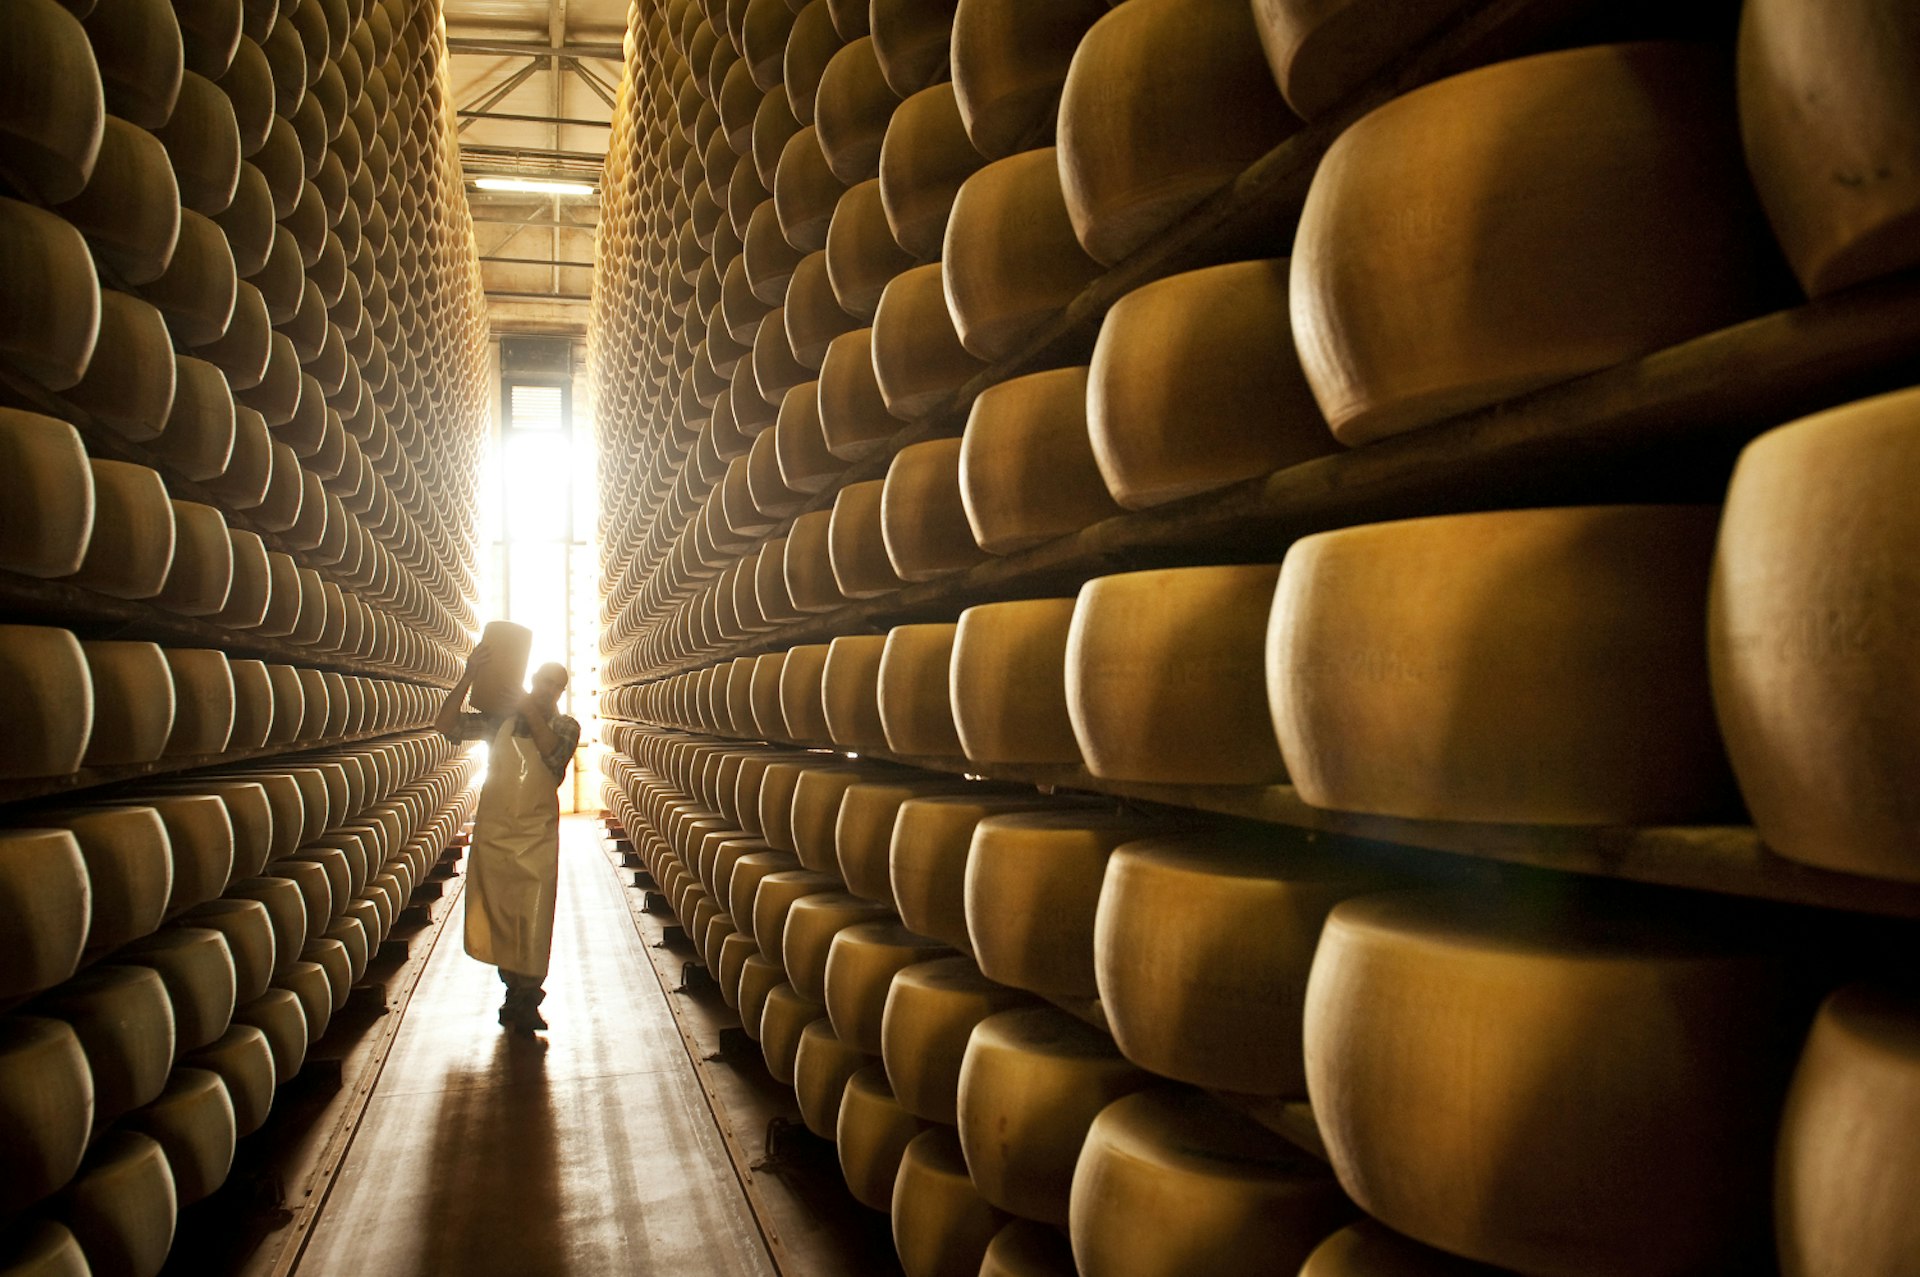 Parmigiano Reggiano is aged on wooden shelves for at least 12 months